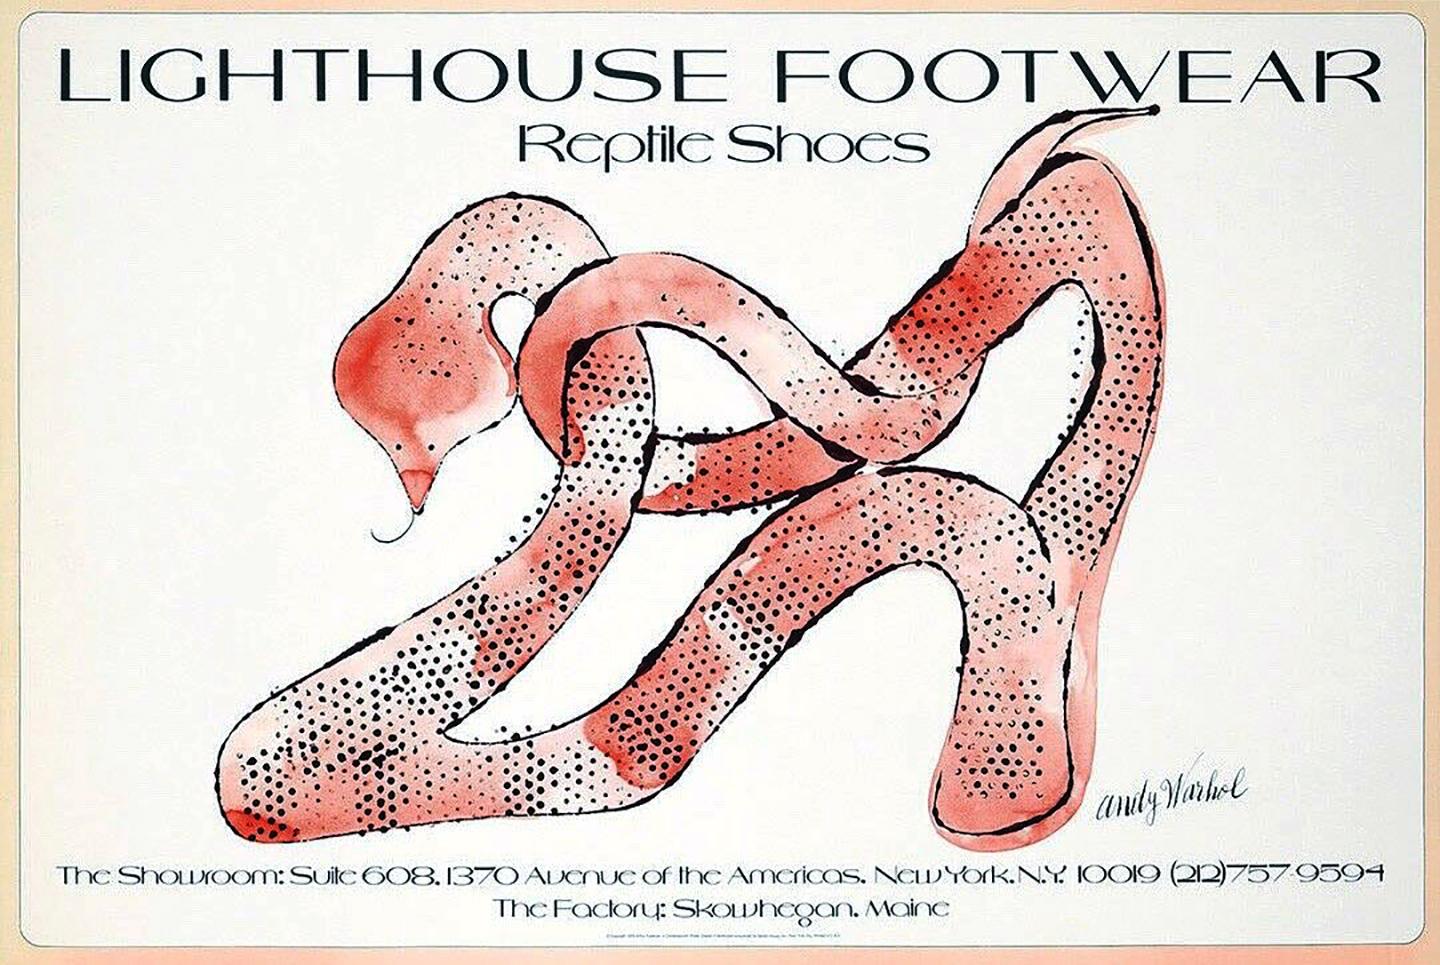 Vintage 1970s Andy Warhol poster
Original, vintage Warhol commissioned poster "Lighthouse Footwear Reptile Shoes," Offset lithograph, New York, NY, 1979. A beautiful, simple, elegant & well-sized original Warhol collectible priced well-within reach.